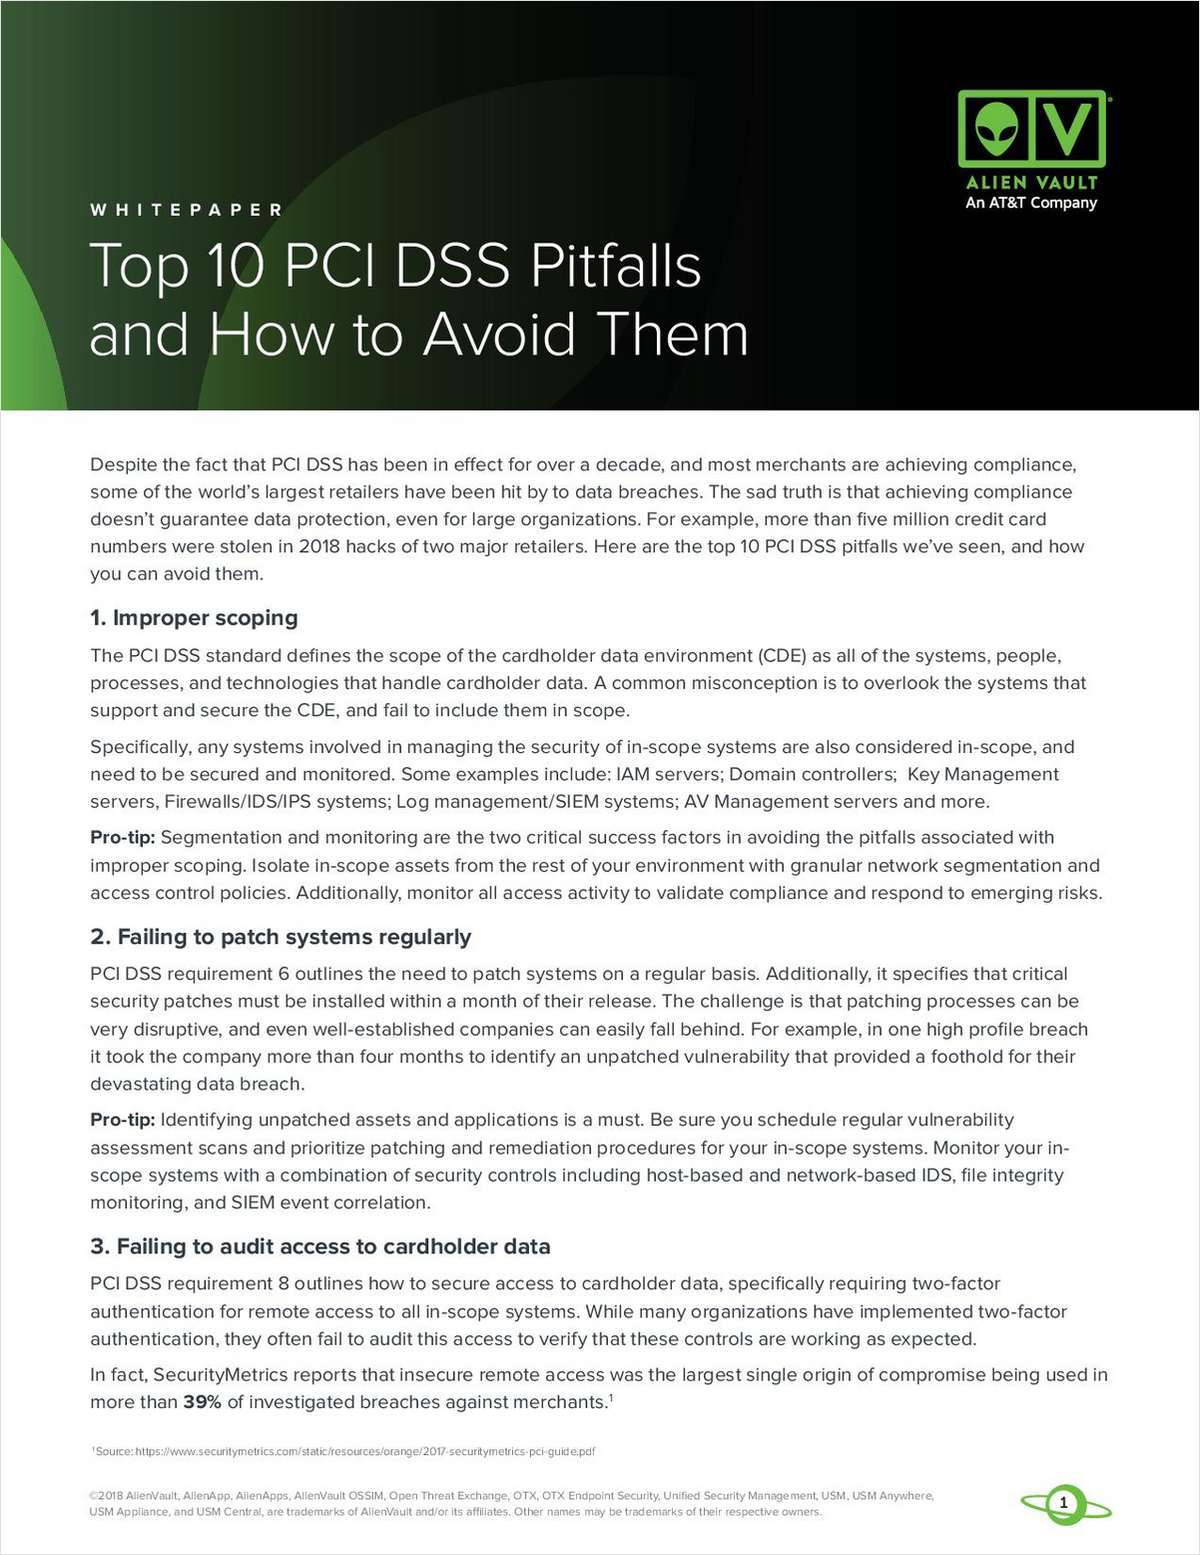 Top 10 PCI DSS Compliance Pitfalls and How to Avoid Them